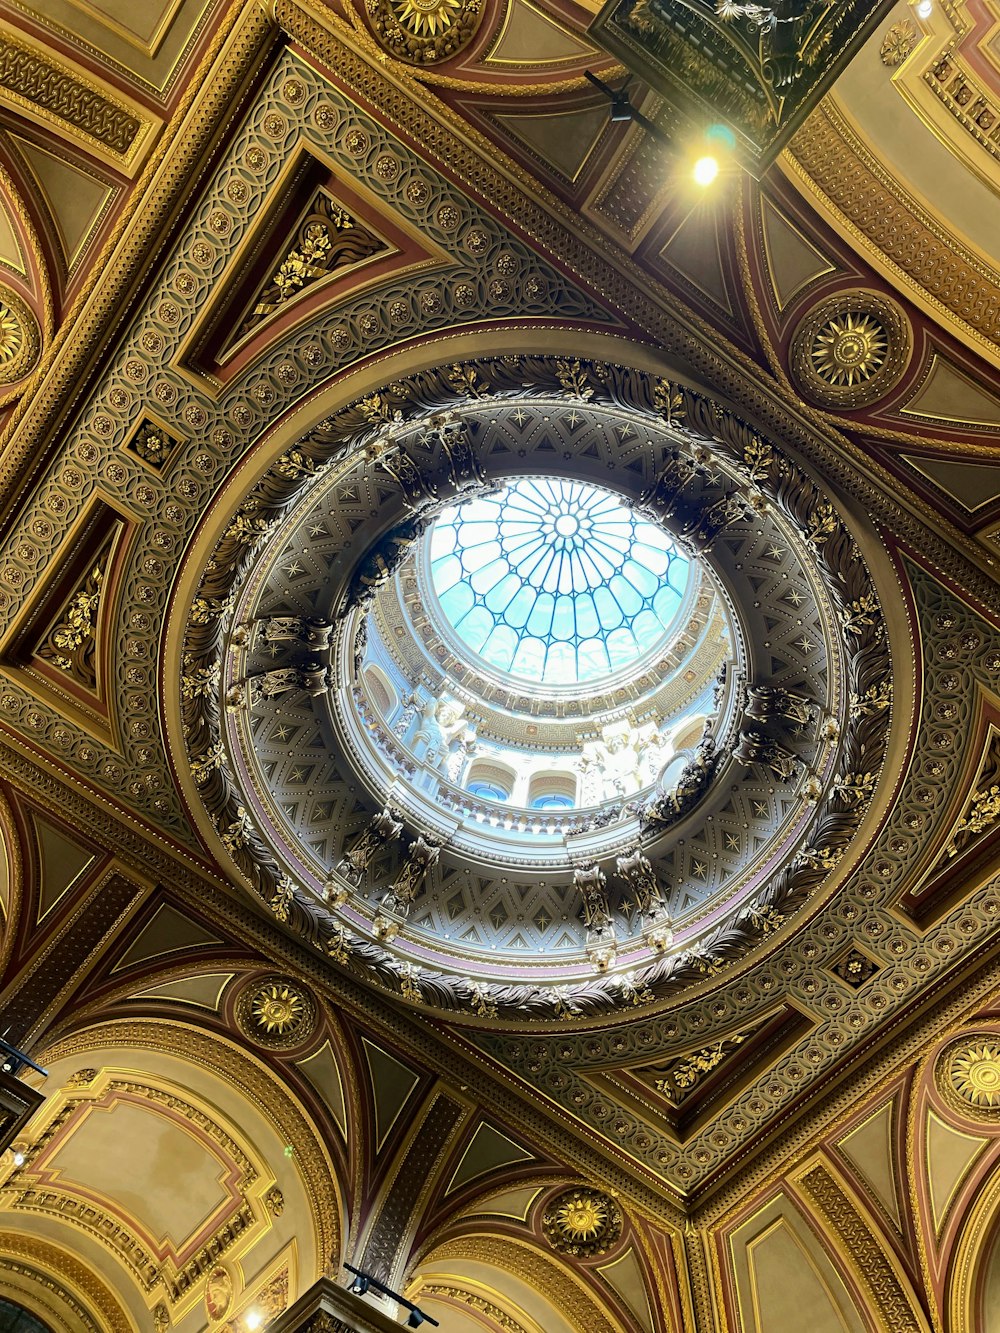 a domed ceiling with a large arched window